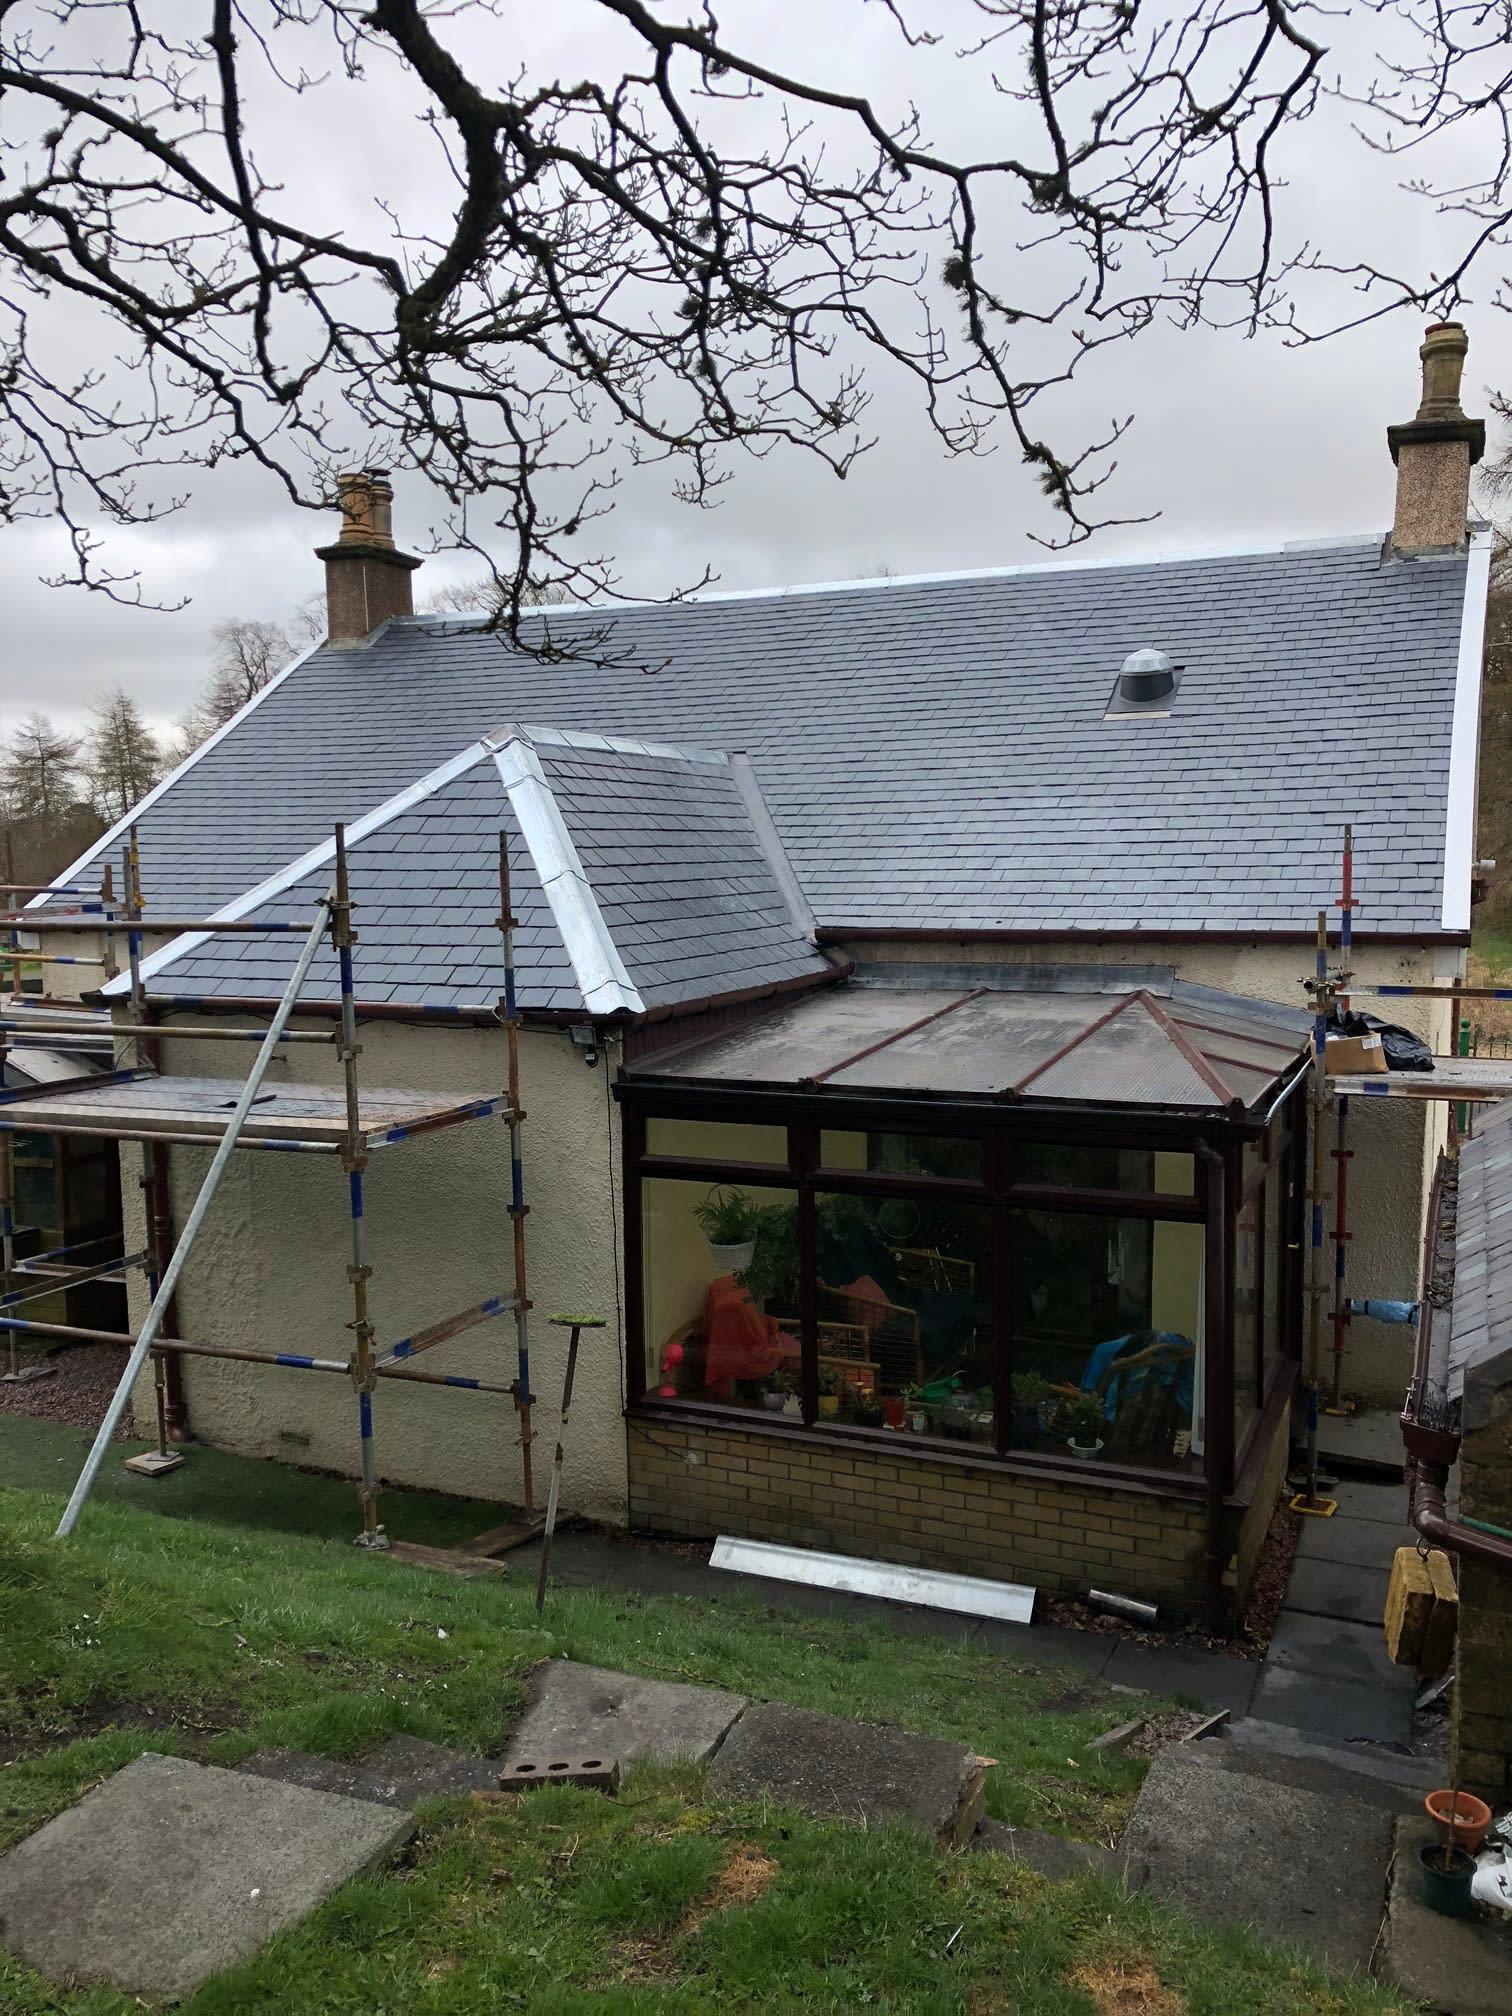 RT Roofing Glasgow 07969 314356